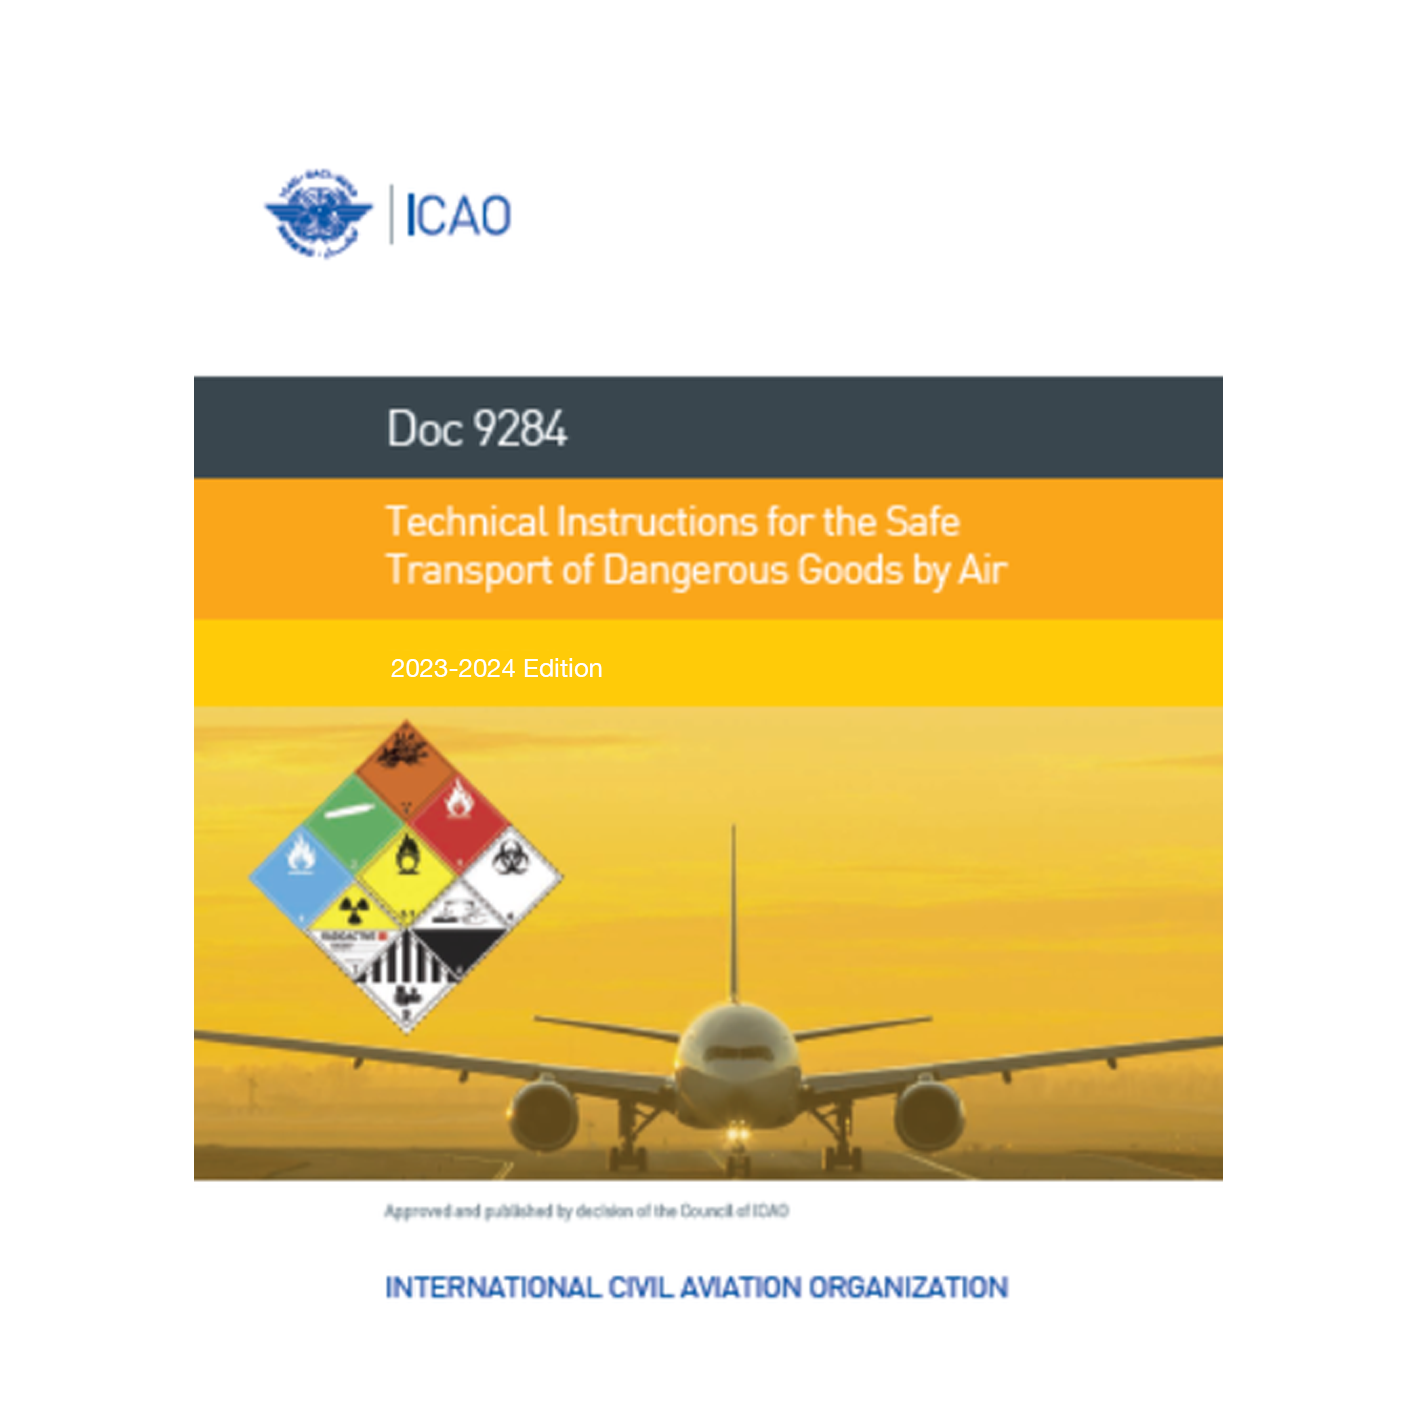 Technical Instructions for the Safe Transport of Dangerous Goods by Air, 2023-2024 Edition